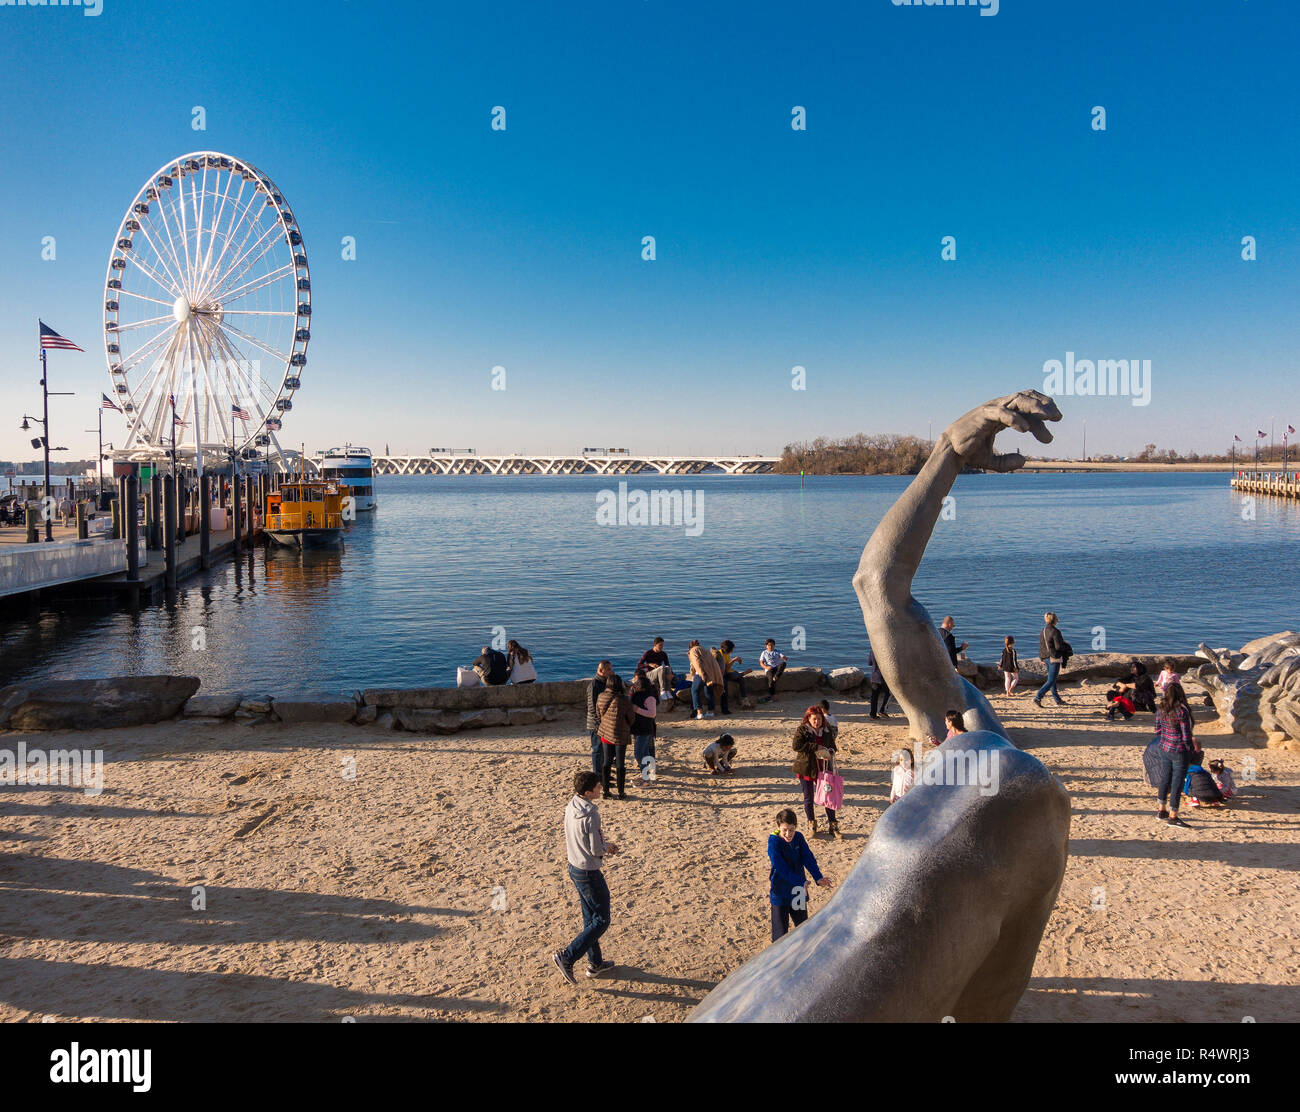 NATIONAL HARBOR, MARYLAND, USA - The Awakening sculpture and people on beach, with Capital Wheel amusement ride at left. Stock Photo